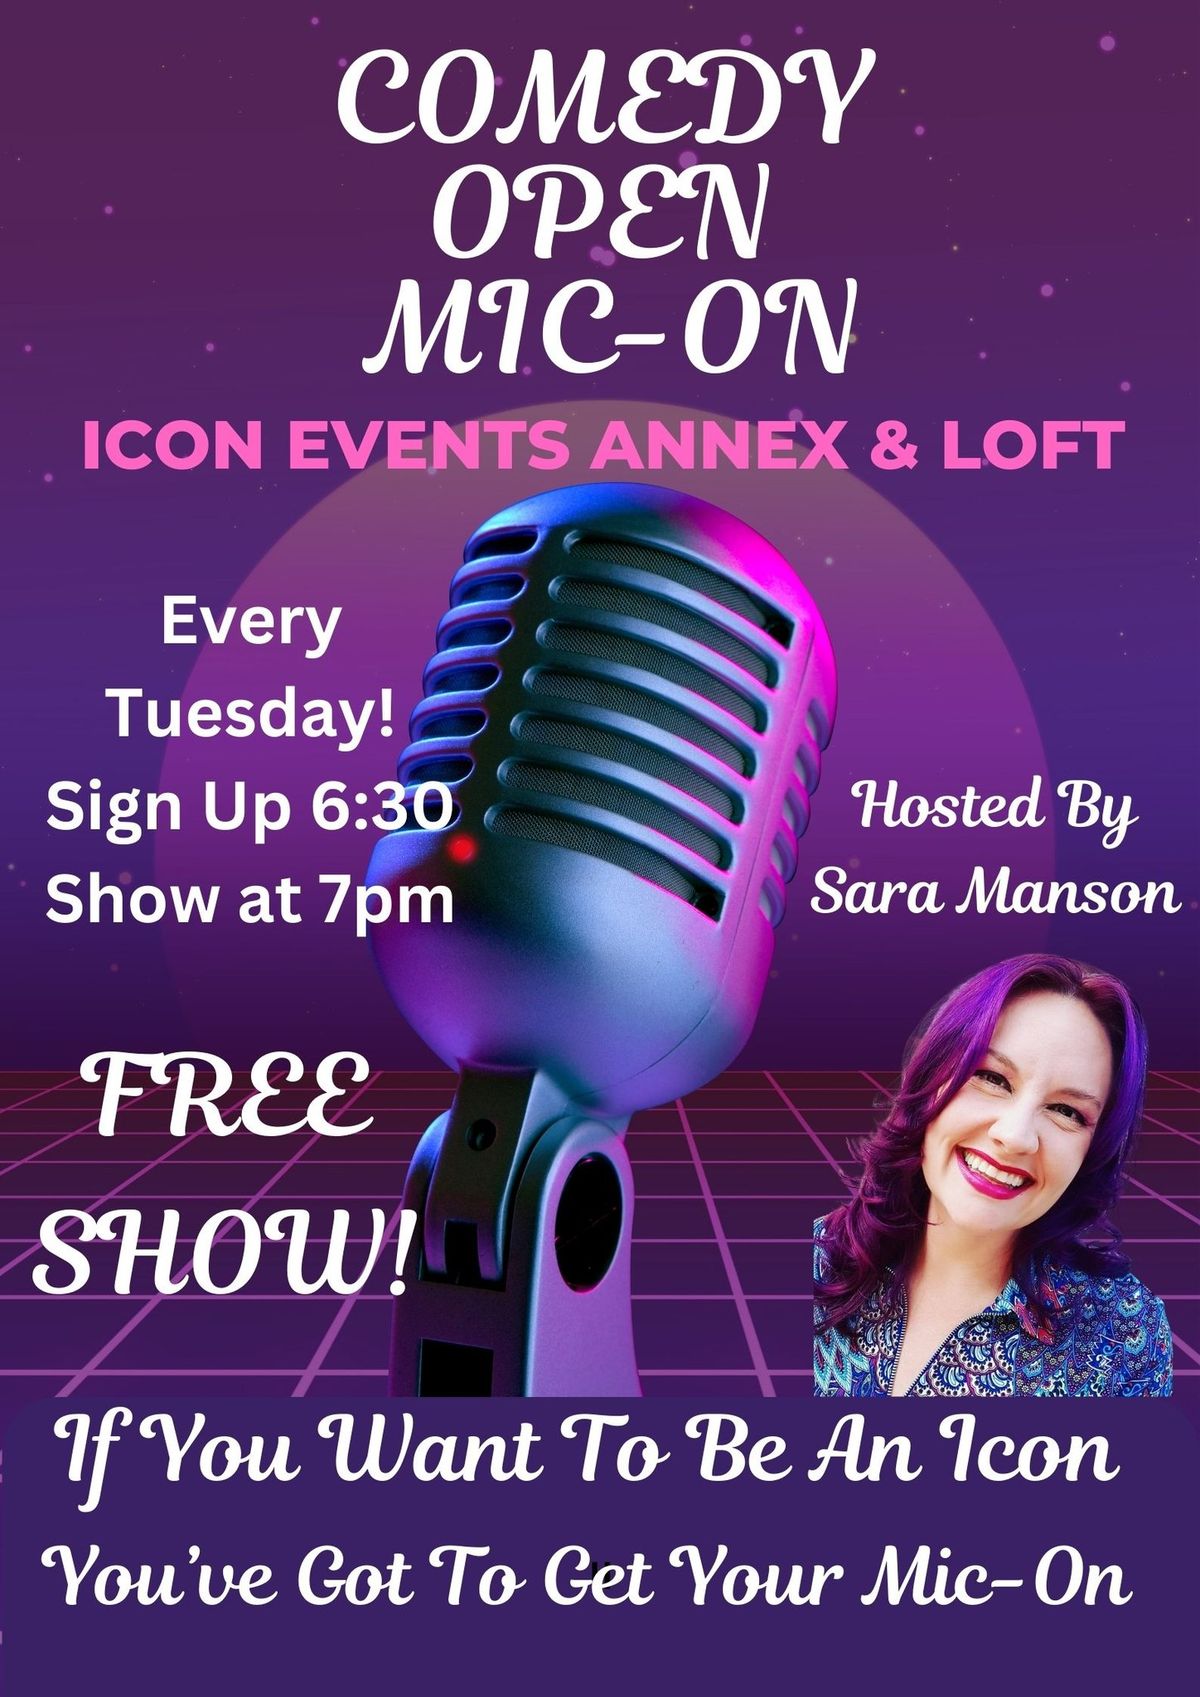 Weekly Tuesday Night Comedy Open Mic-On! Hosted by Sara Manson